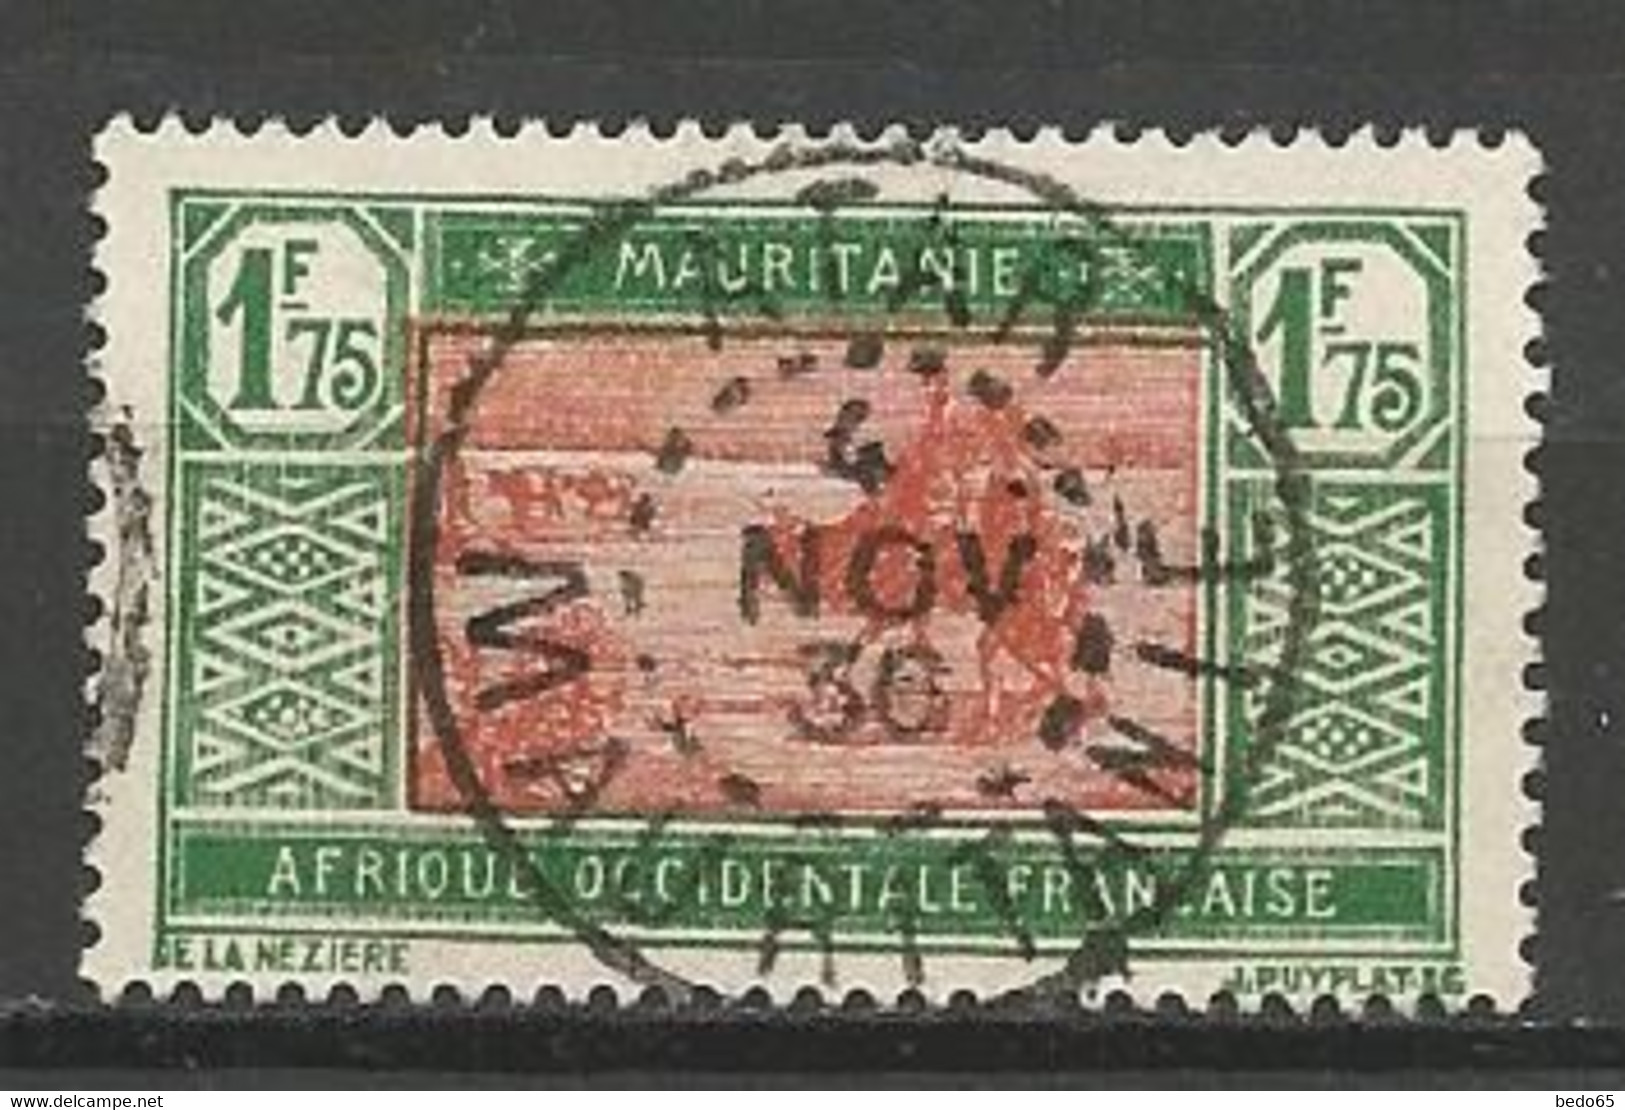 MAURITANIE N° 60A CACHET ATAR - Used Stamps